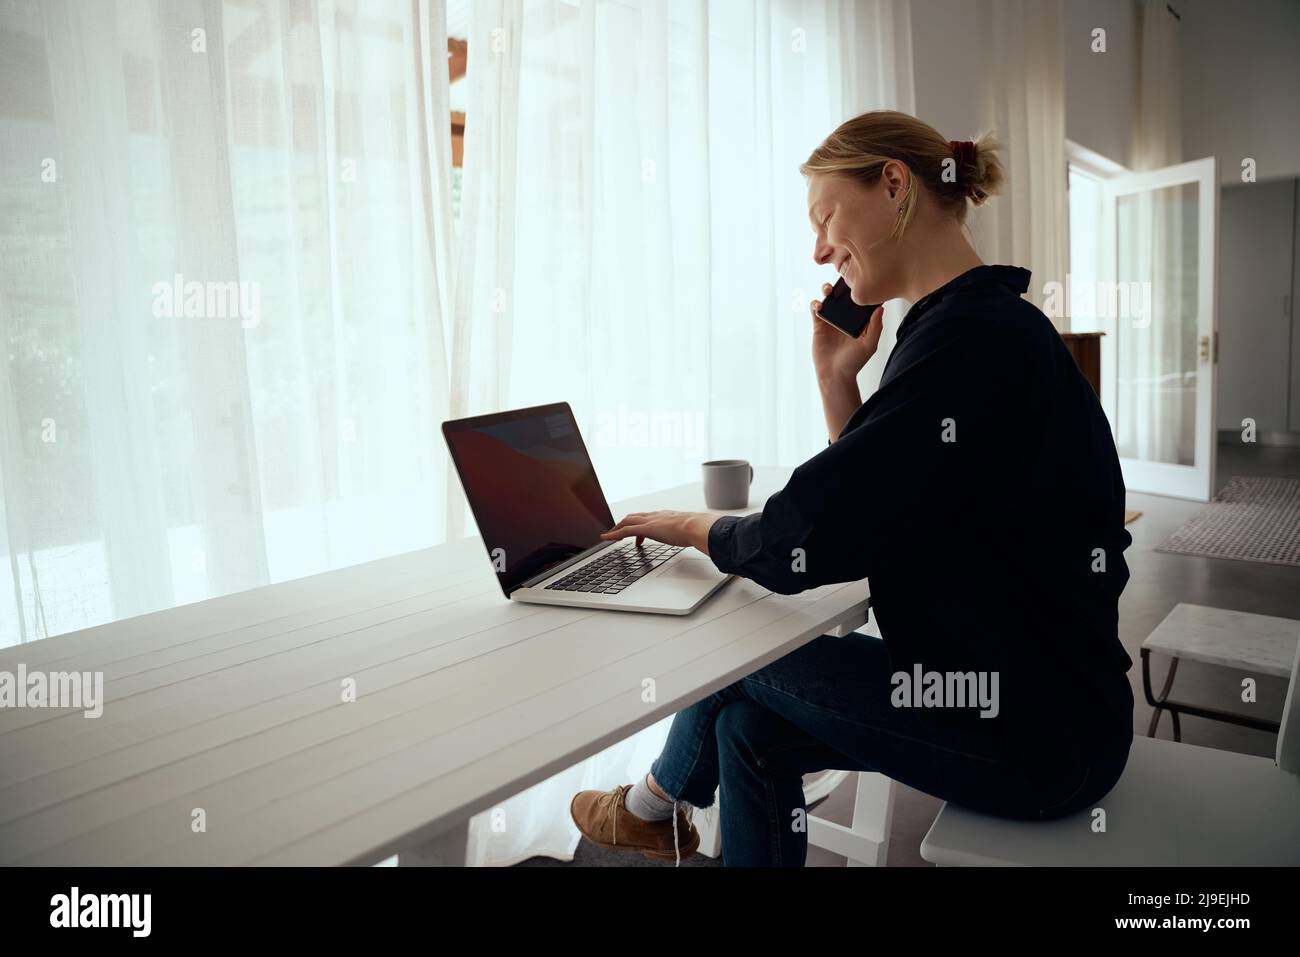 Caucasian female working from home engaging in business call sitting  Stock Photo